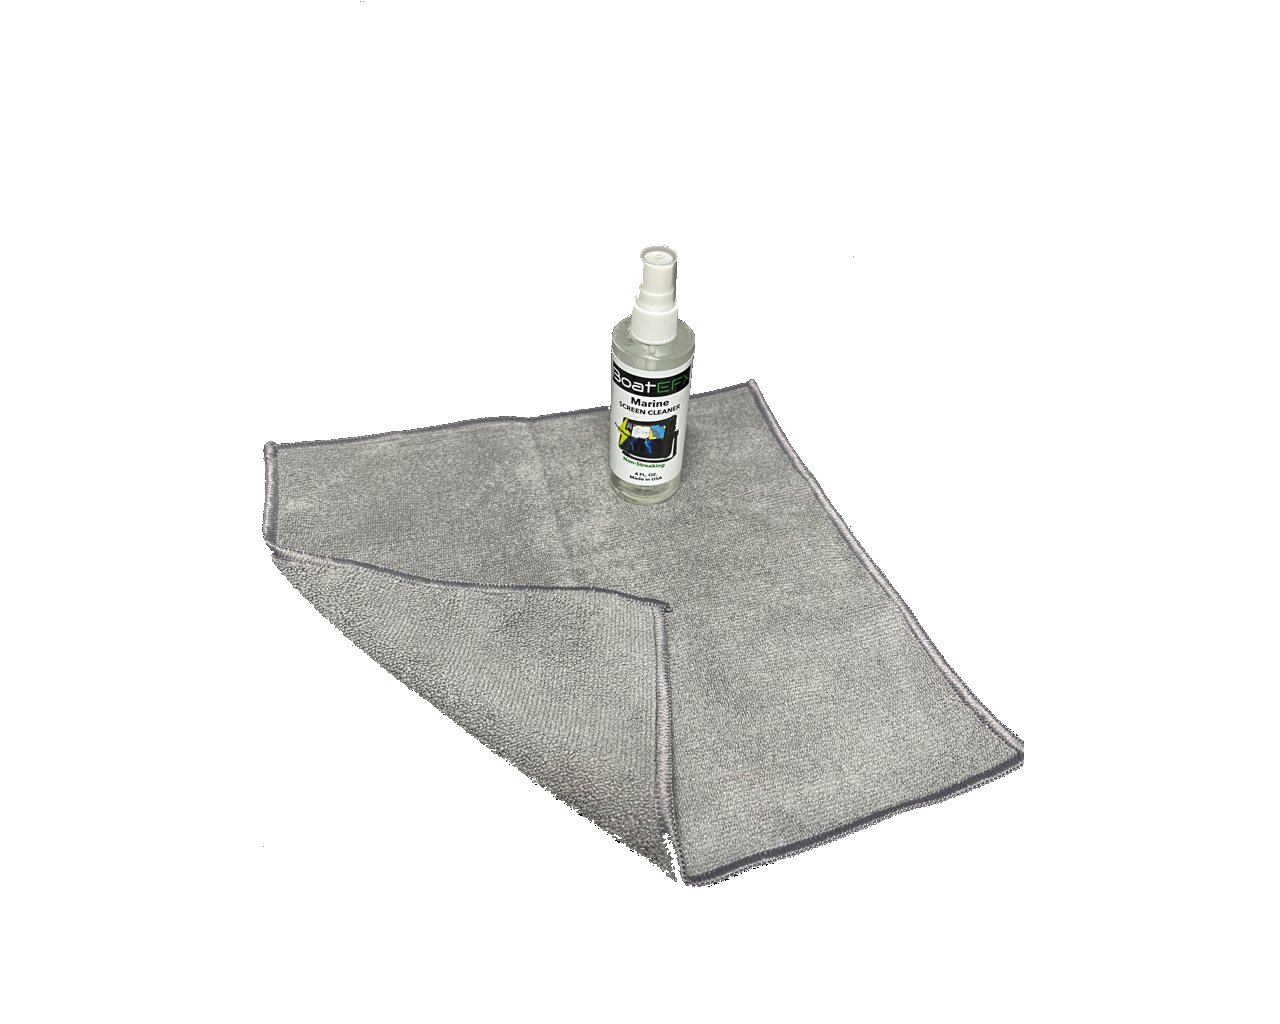 Branded Microfiber Screen Cleaning Cloths